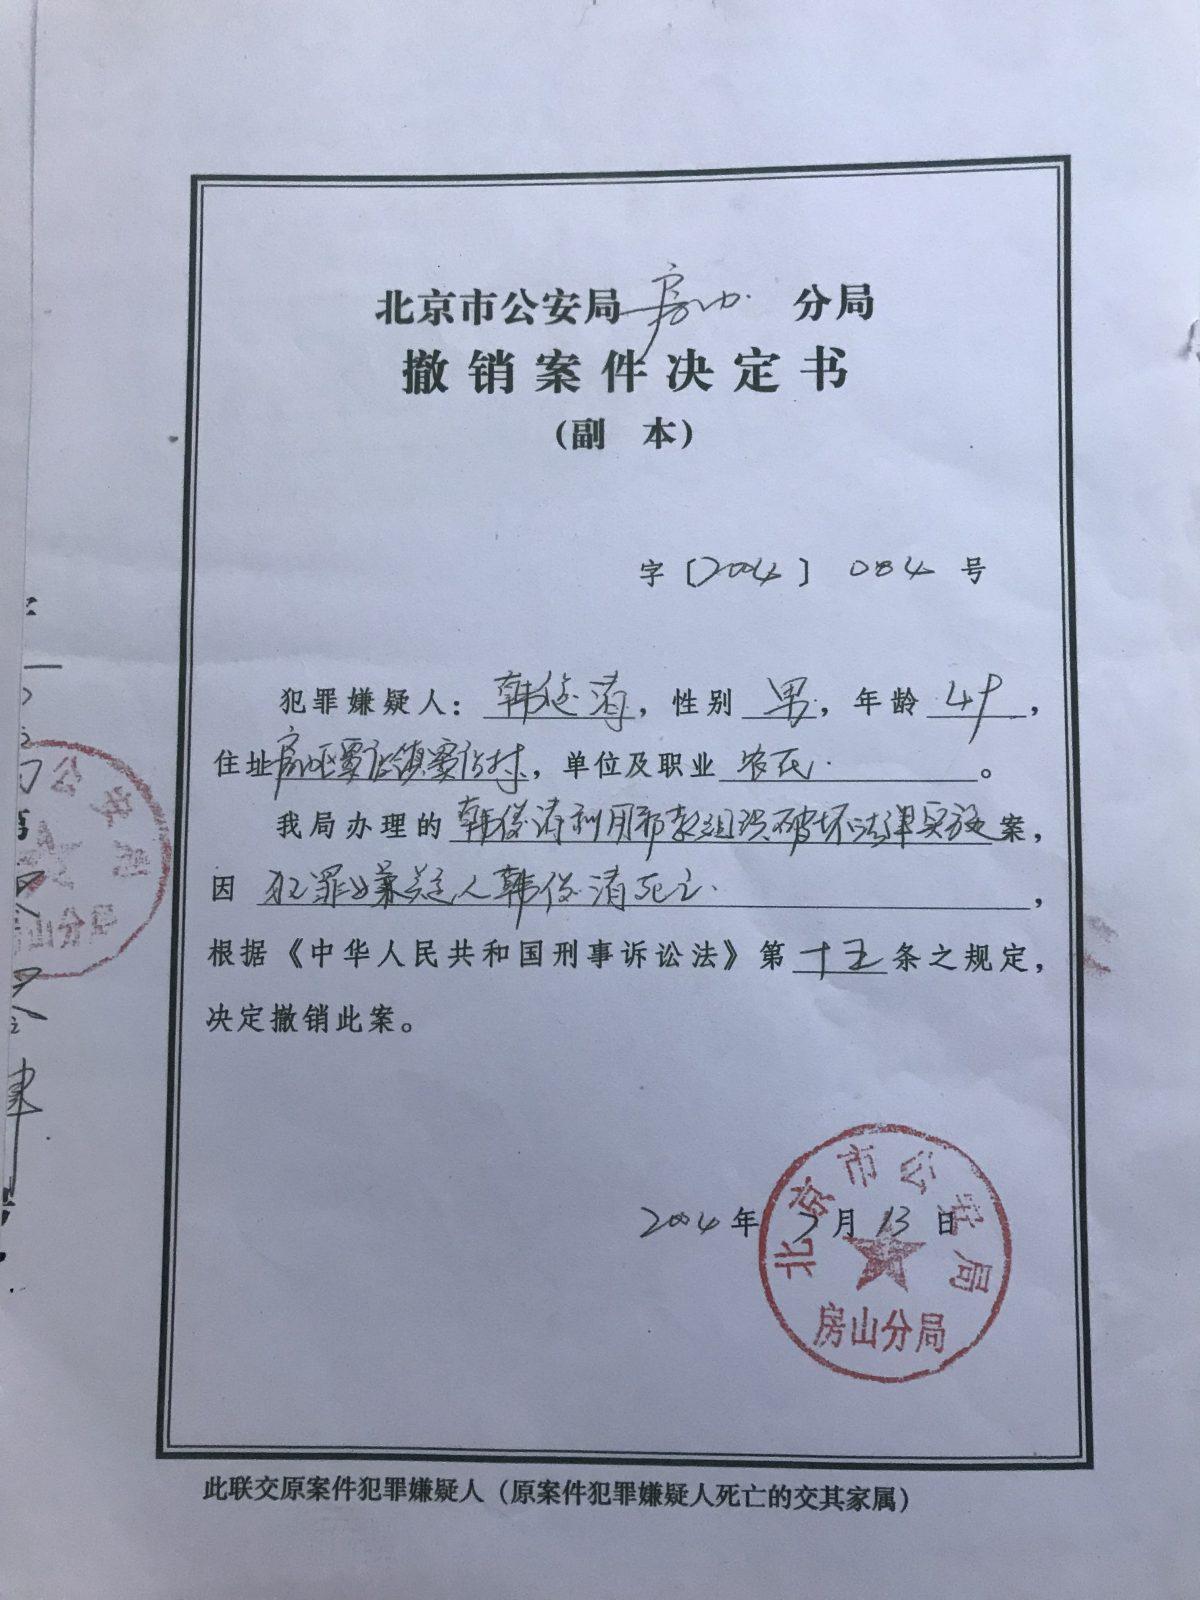 The document states that the Beijing police station is withdrawing its case against Han Junqing as he has passed away in custody. (Courtesy of Han Yu)